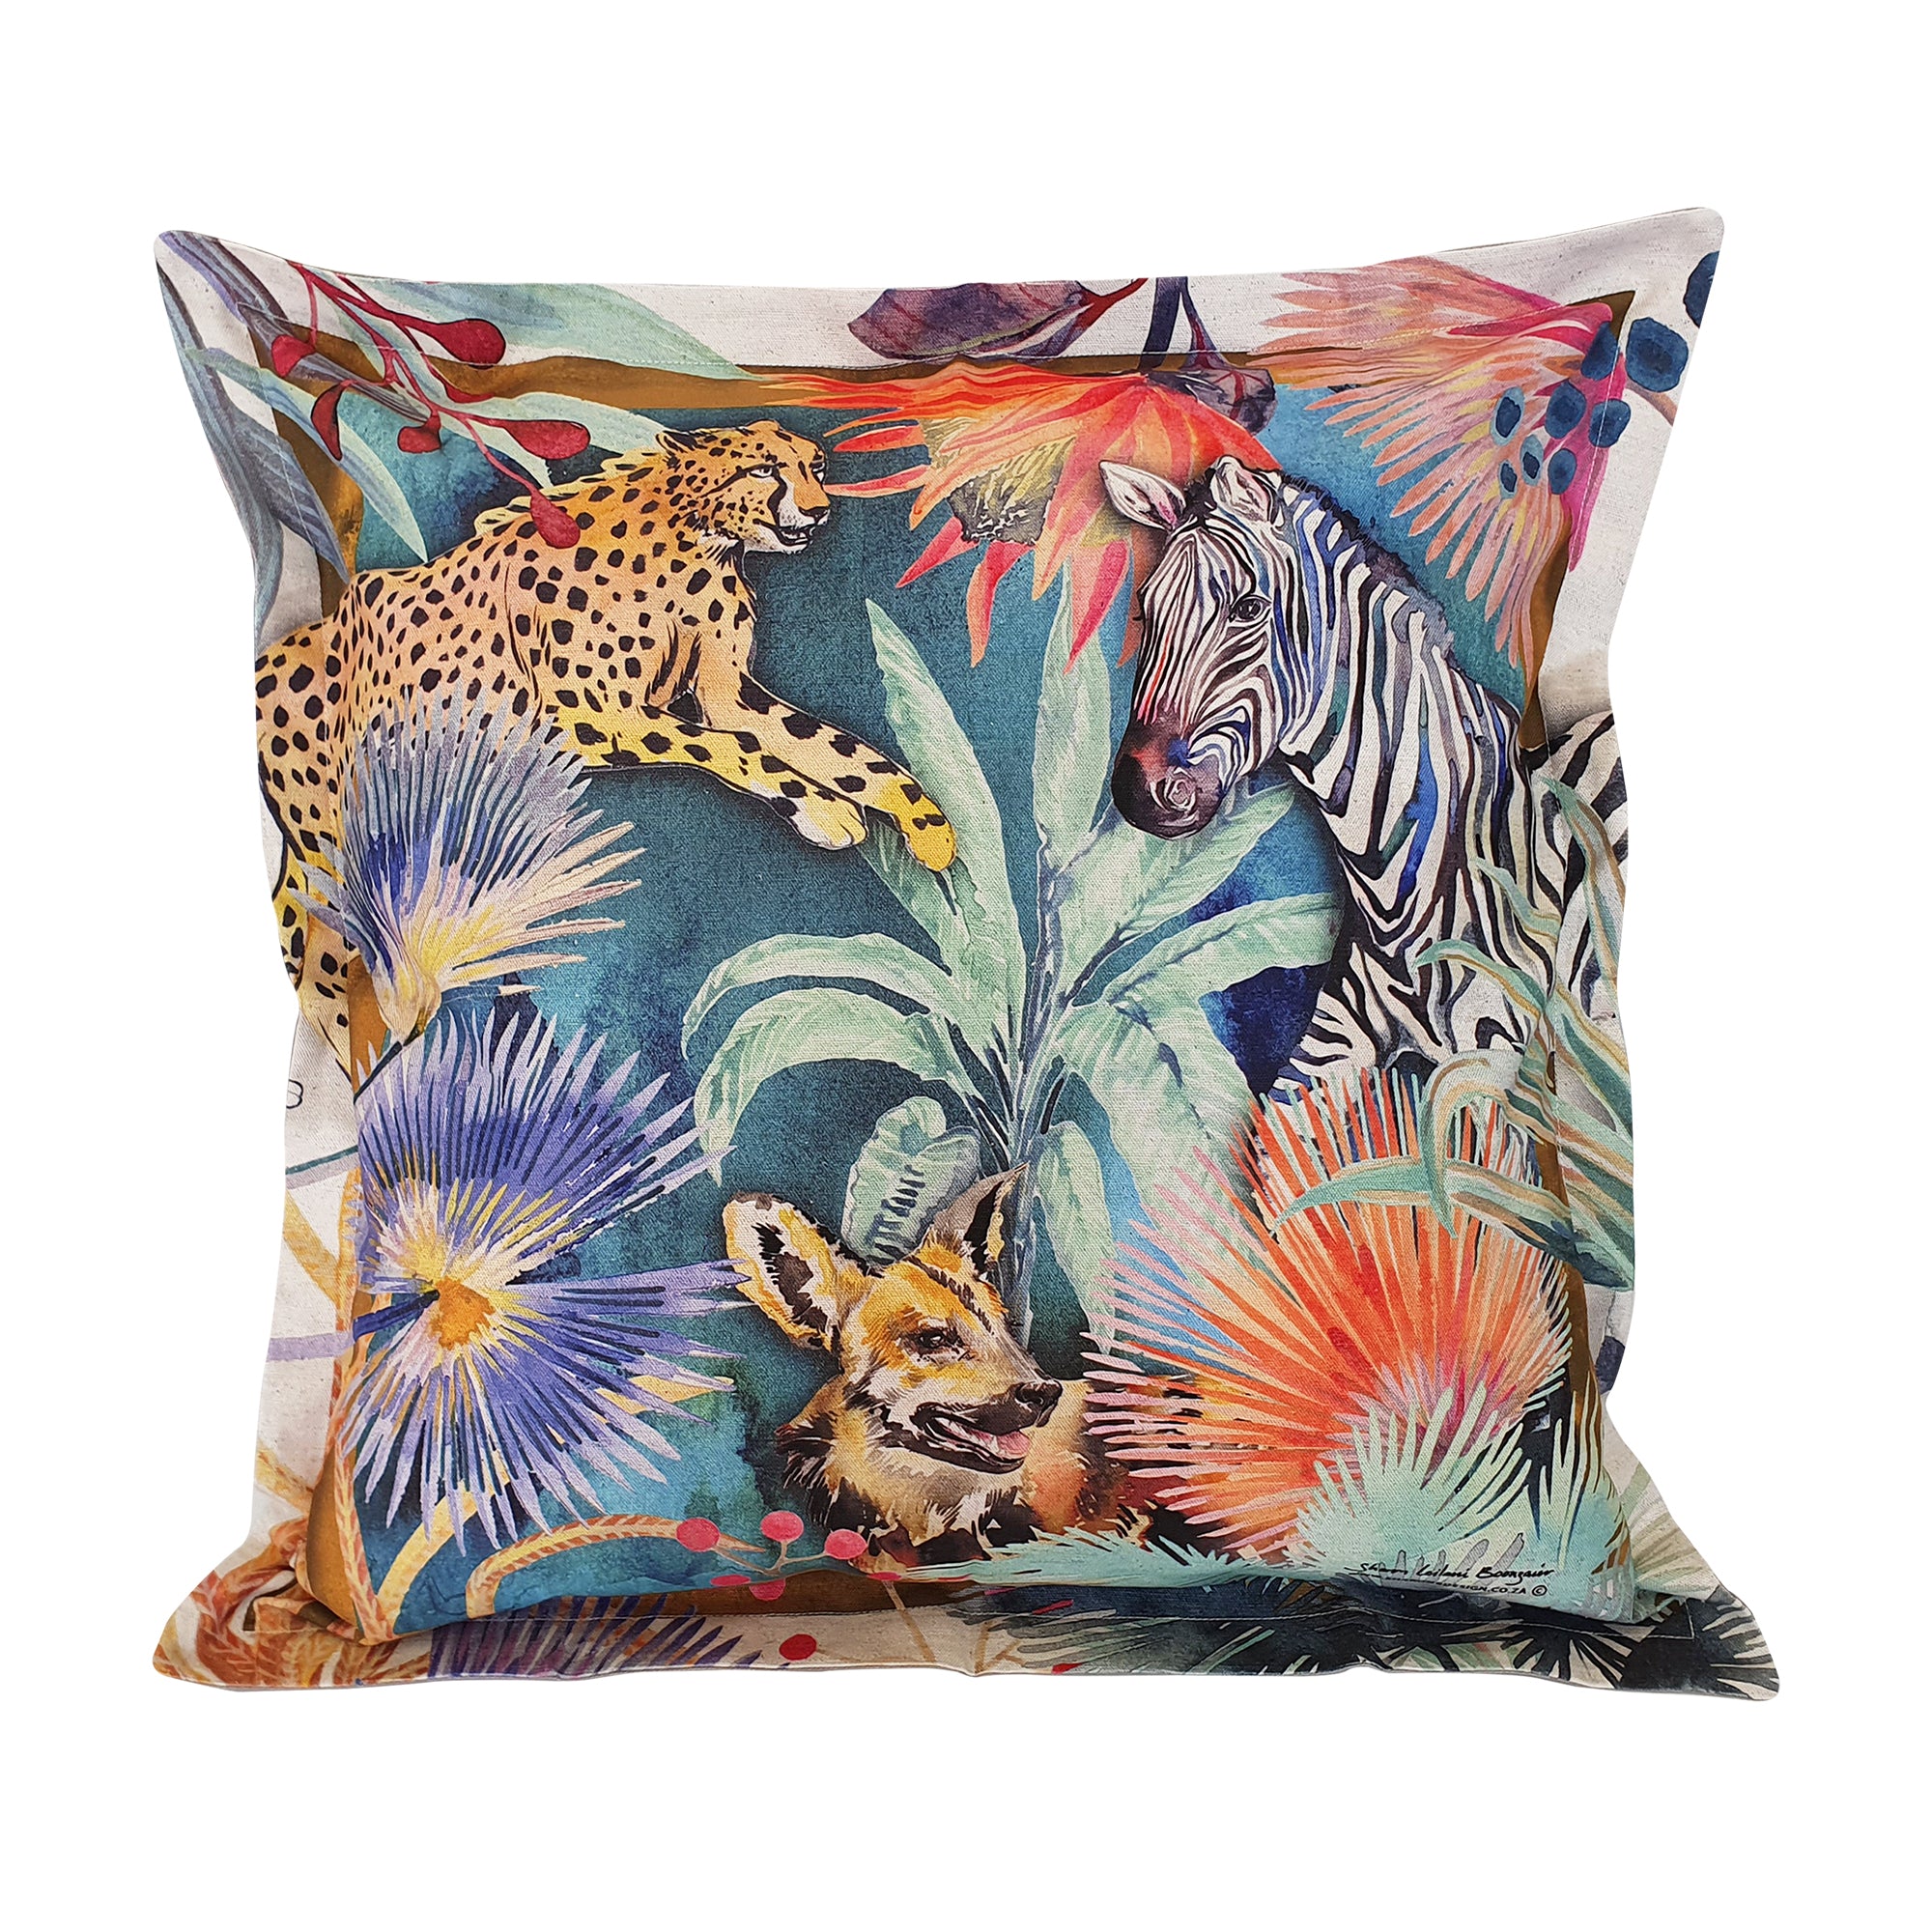 Wildlife with Cheetah Cushion Cover , Standard, Cotton-Linen Blend